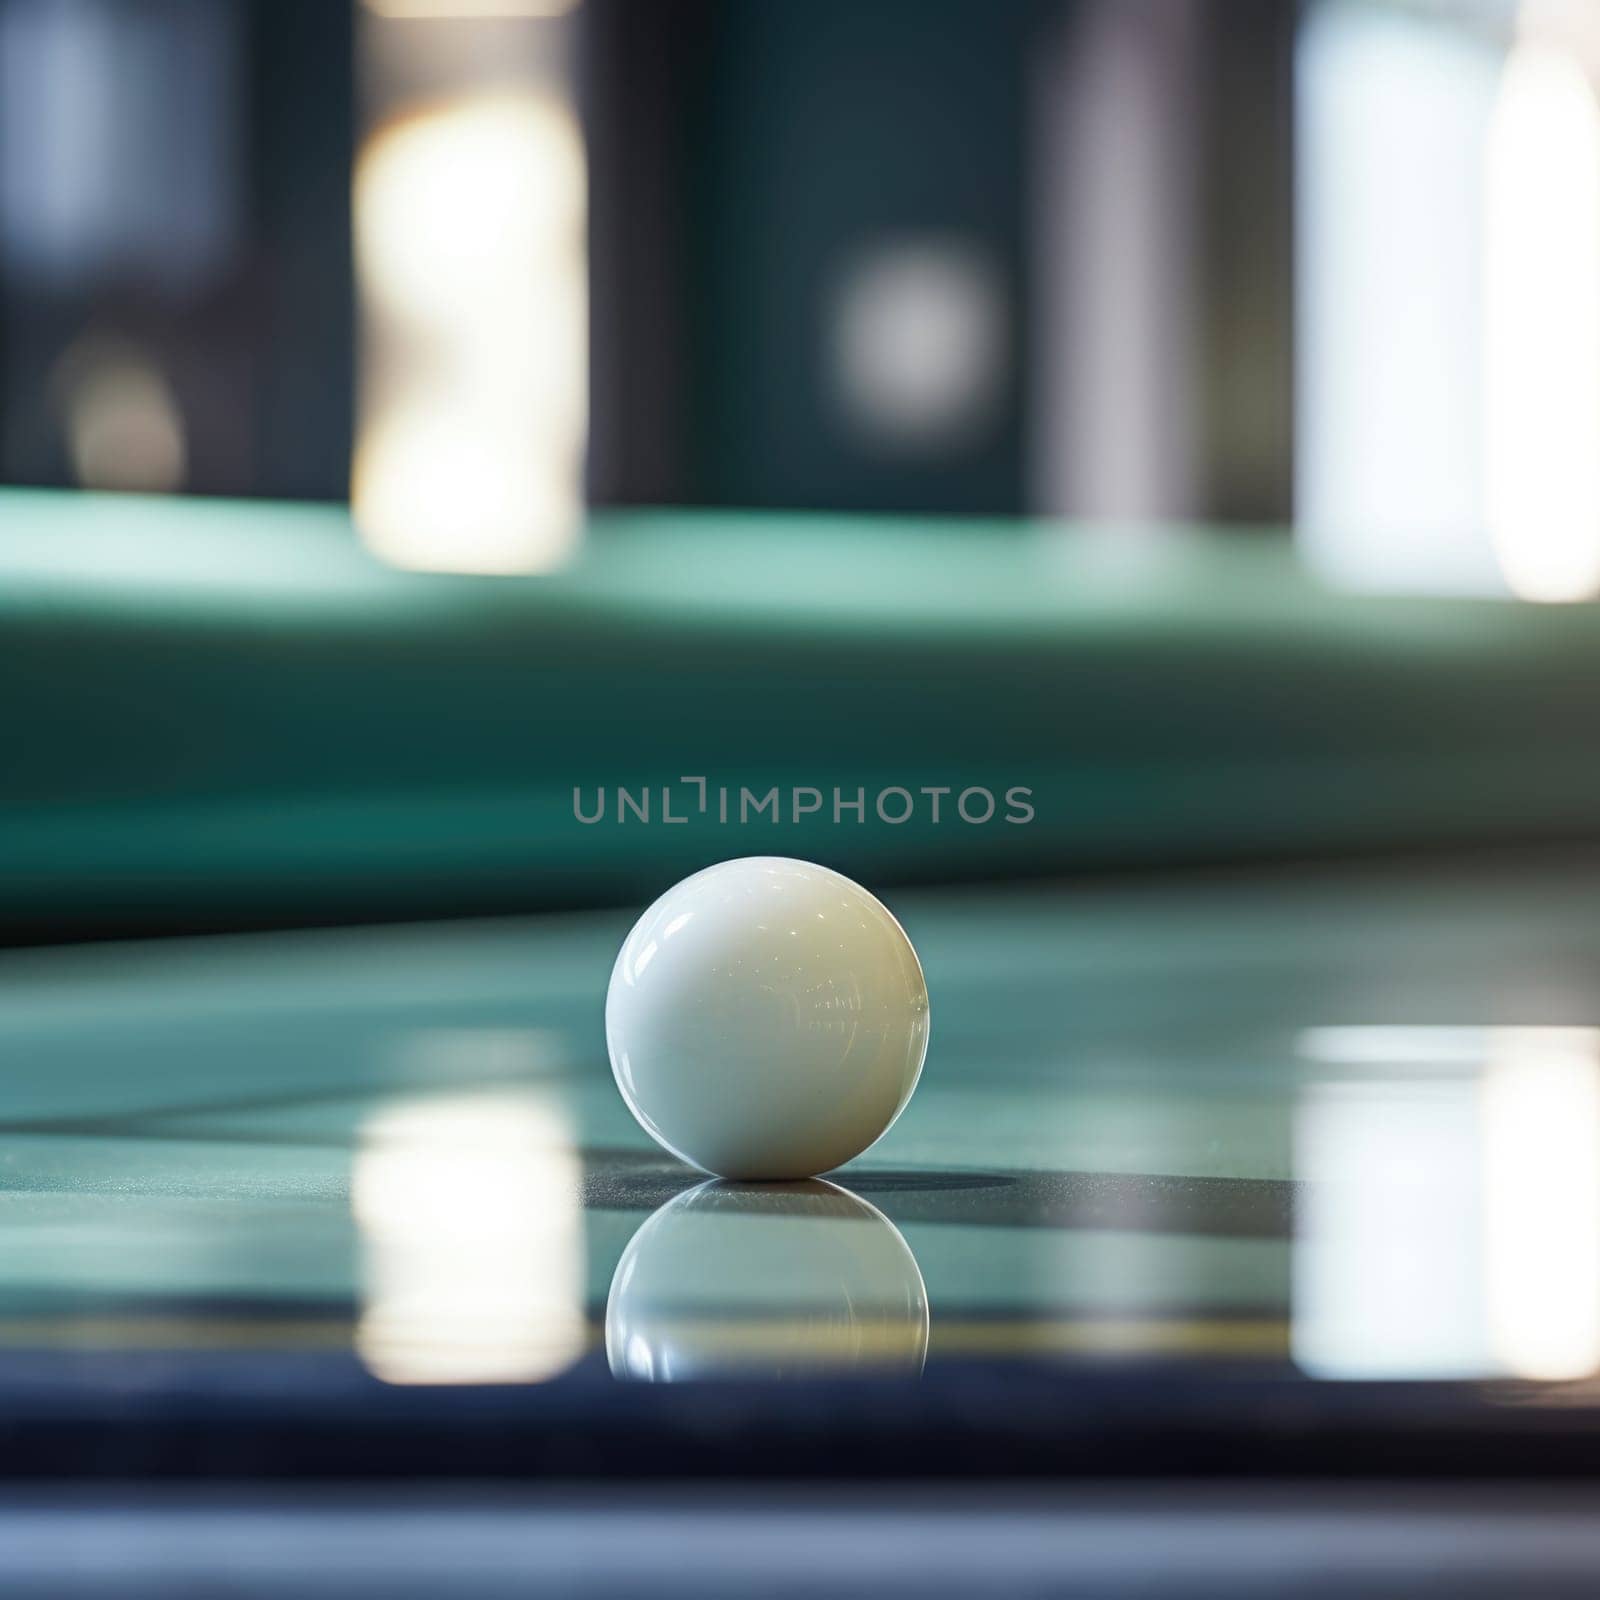 A white ball sitting on a pool table